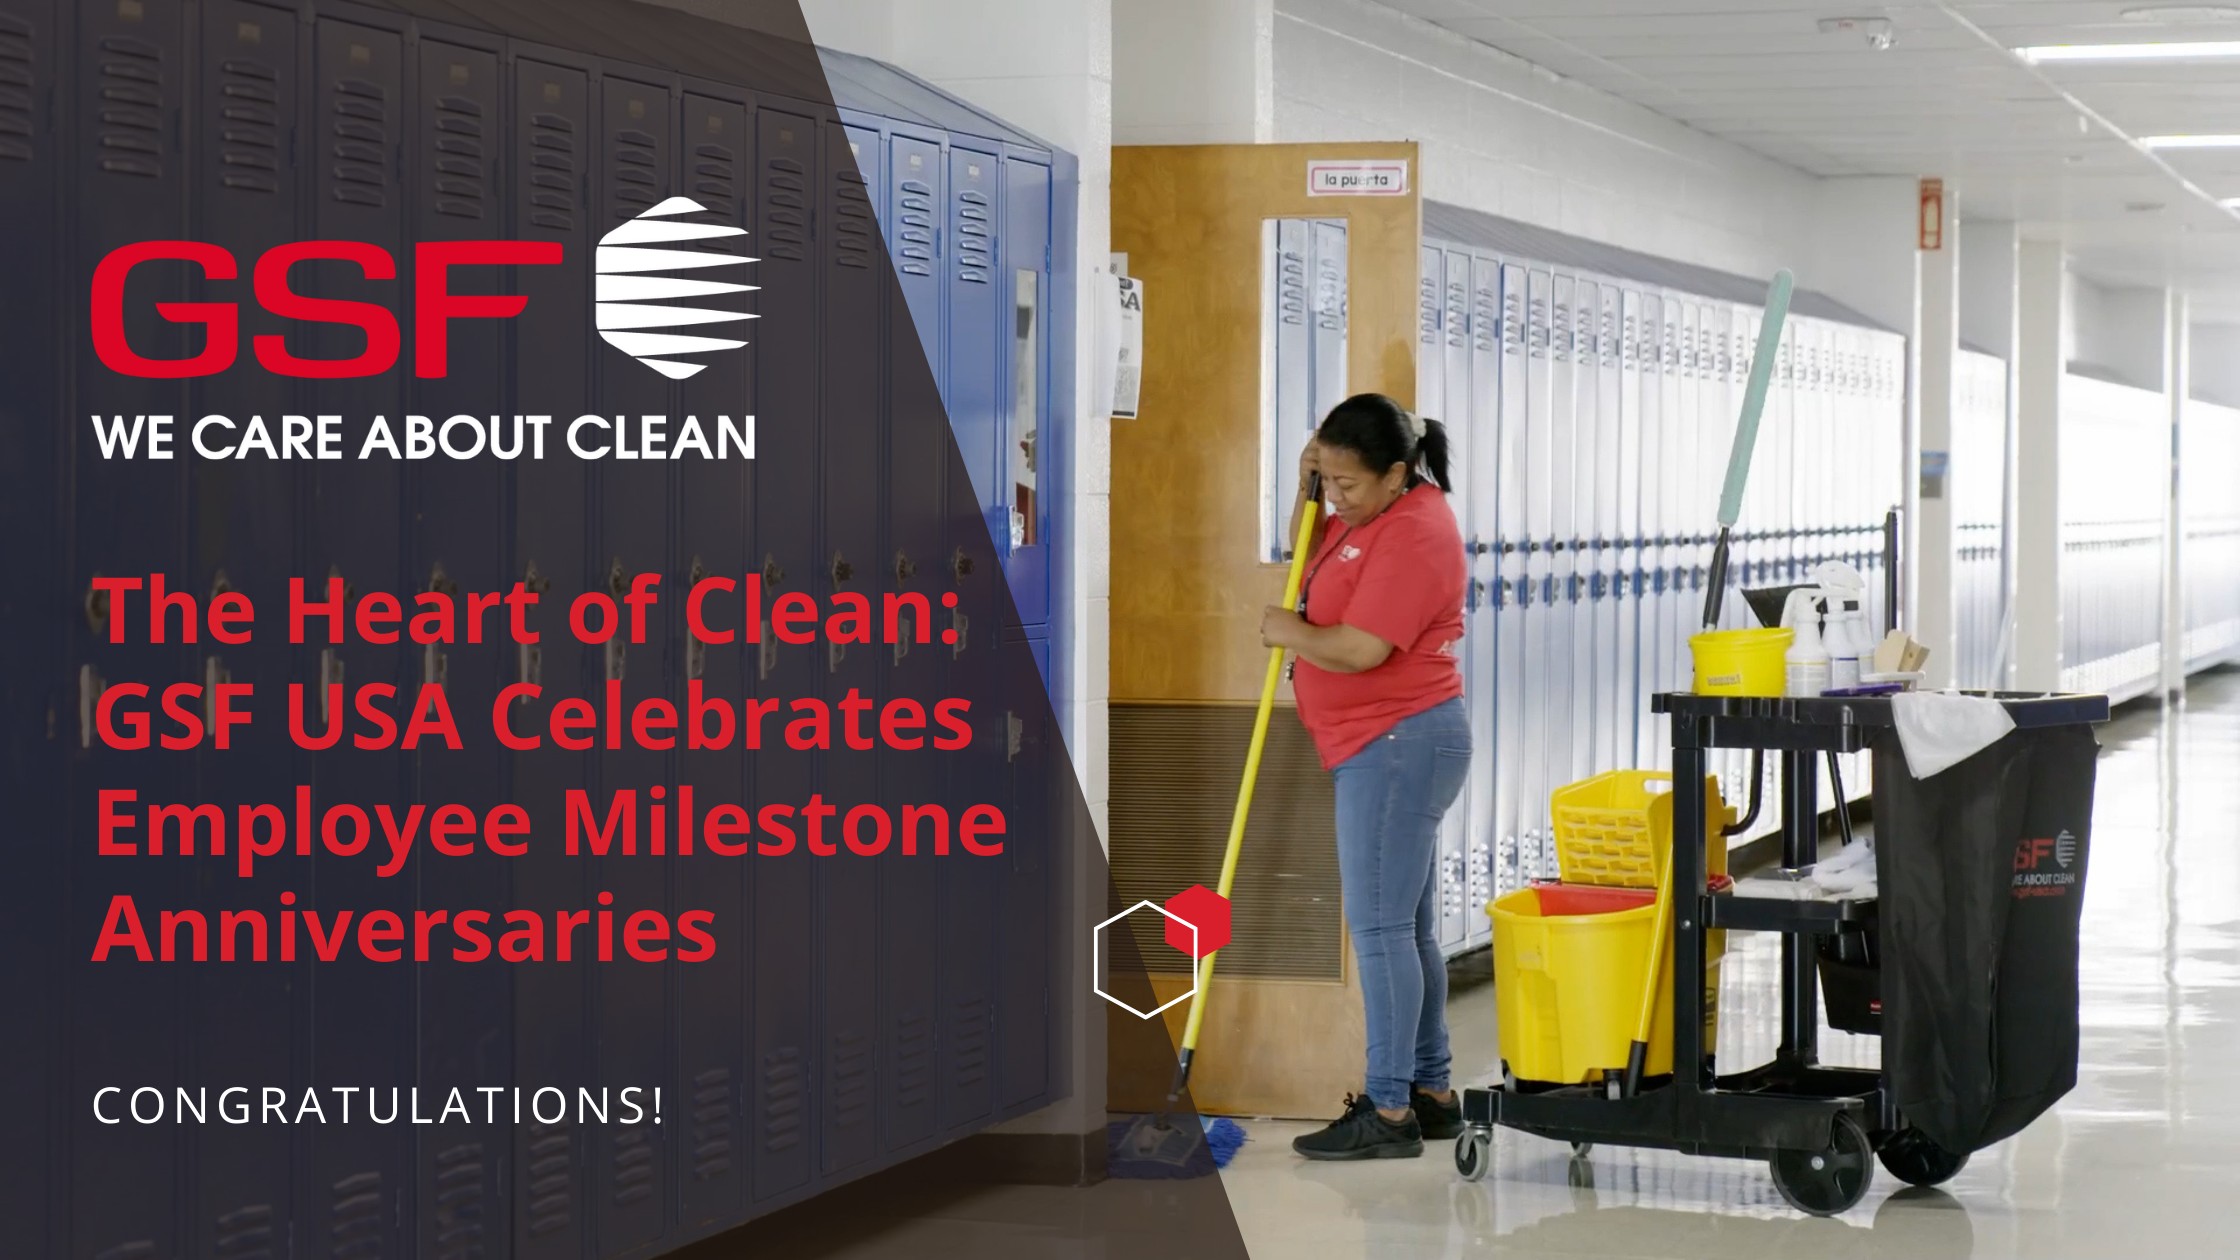 THE HEART OF CLEAN: GSF USA CELEBRATES EMPLOYEE MILESTONES AND ANNIVERSARIES